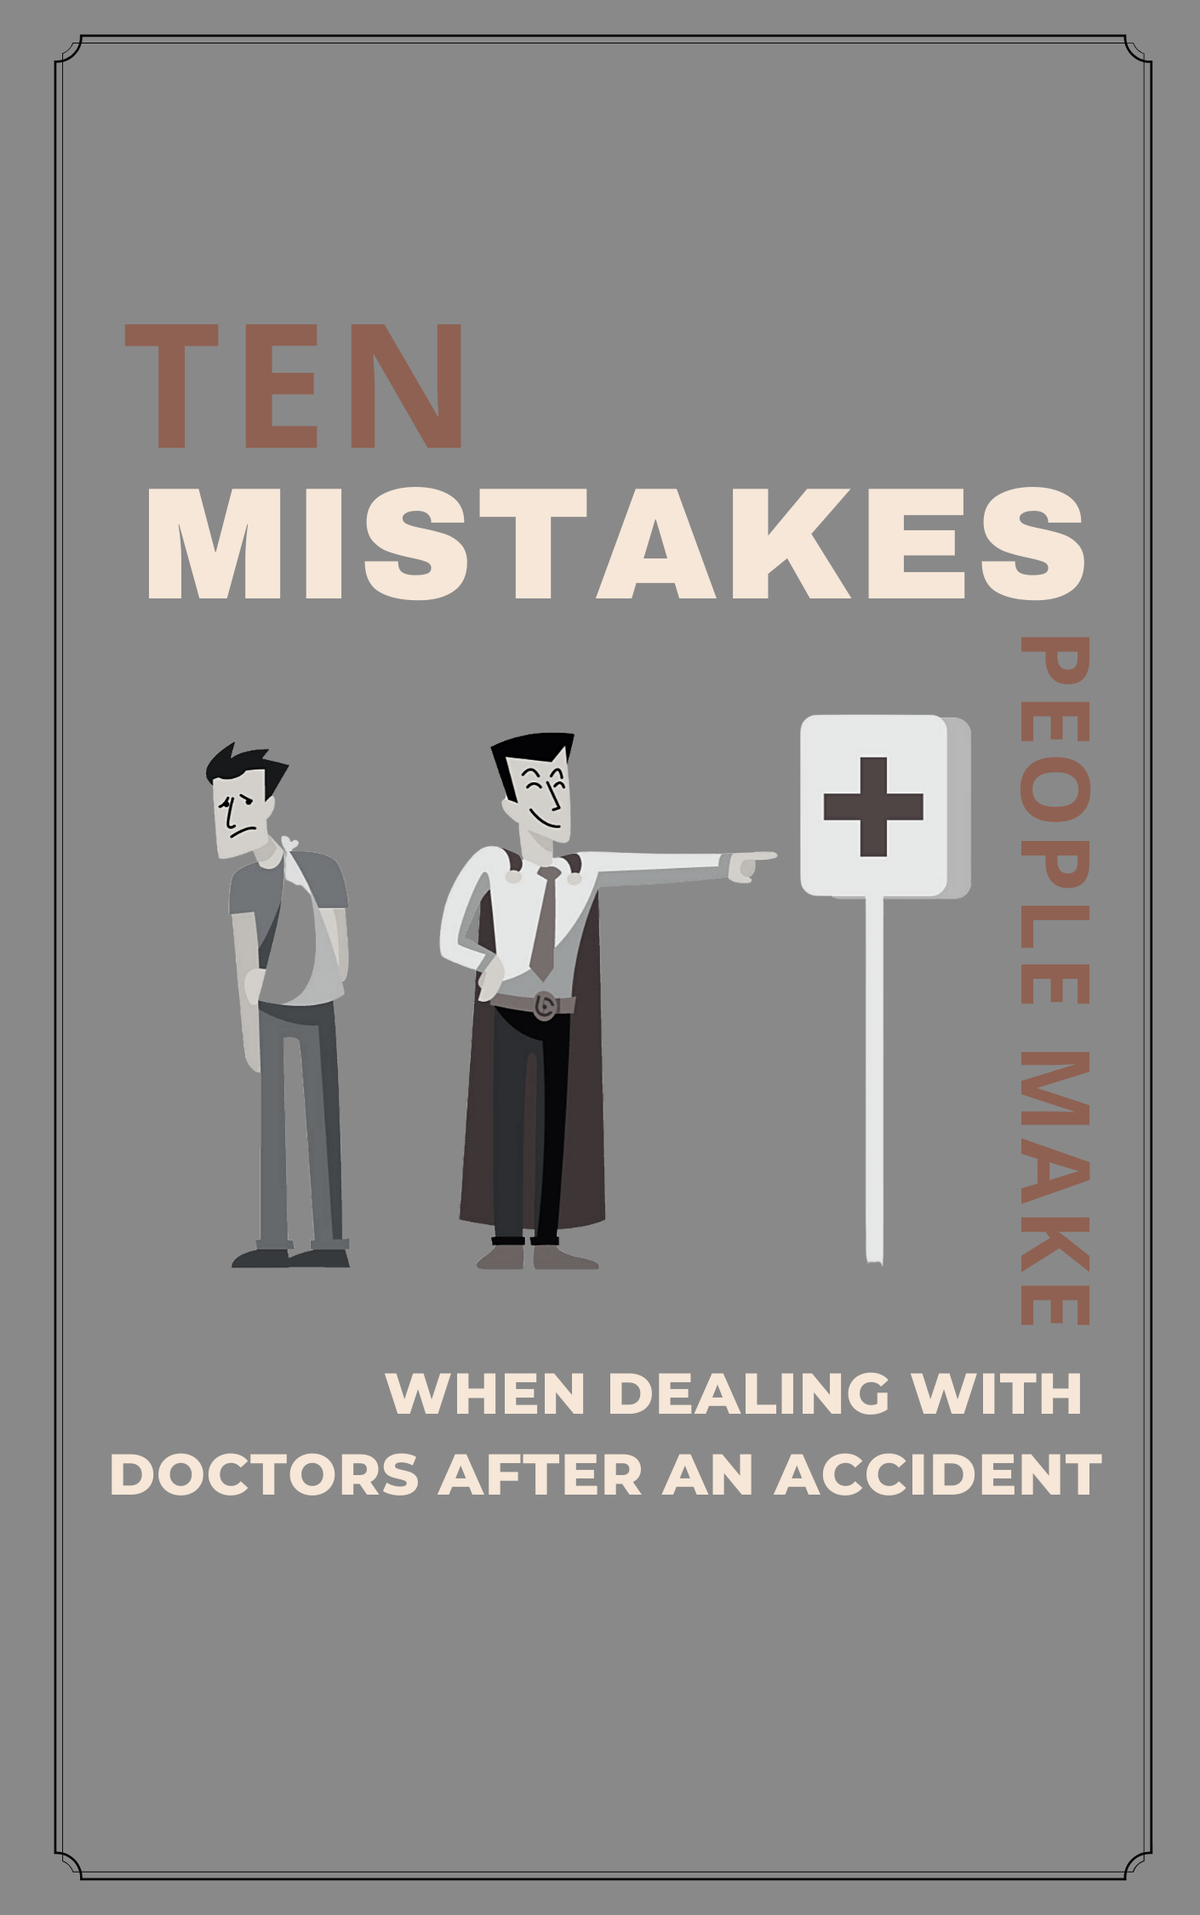 10 Mistakes People Make with Doctors After an Injury